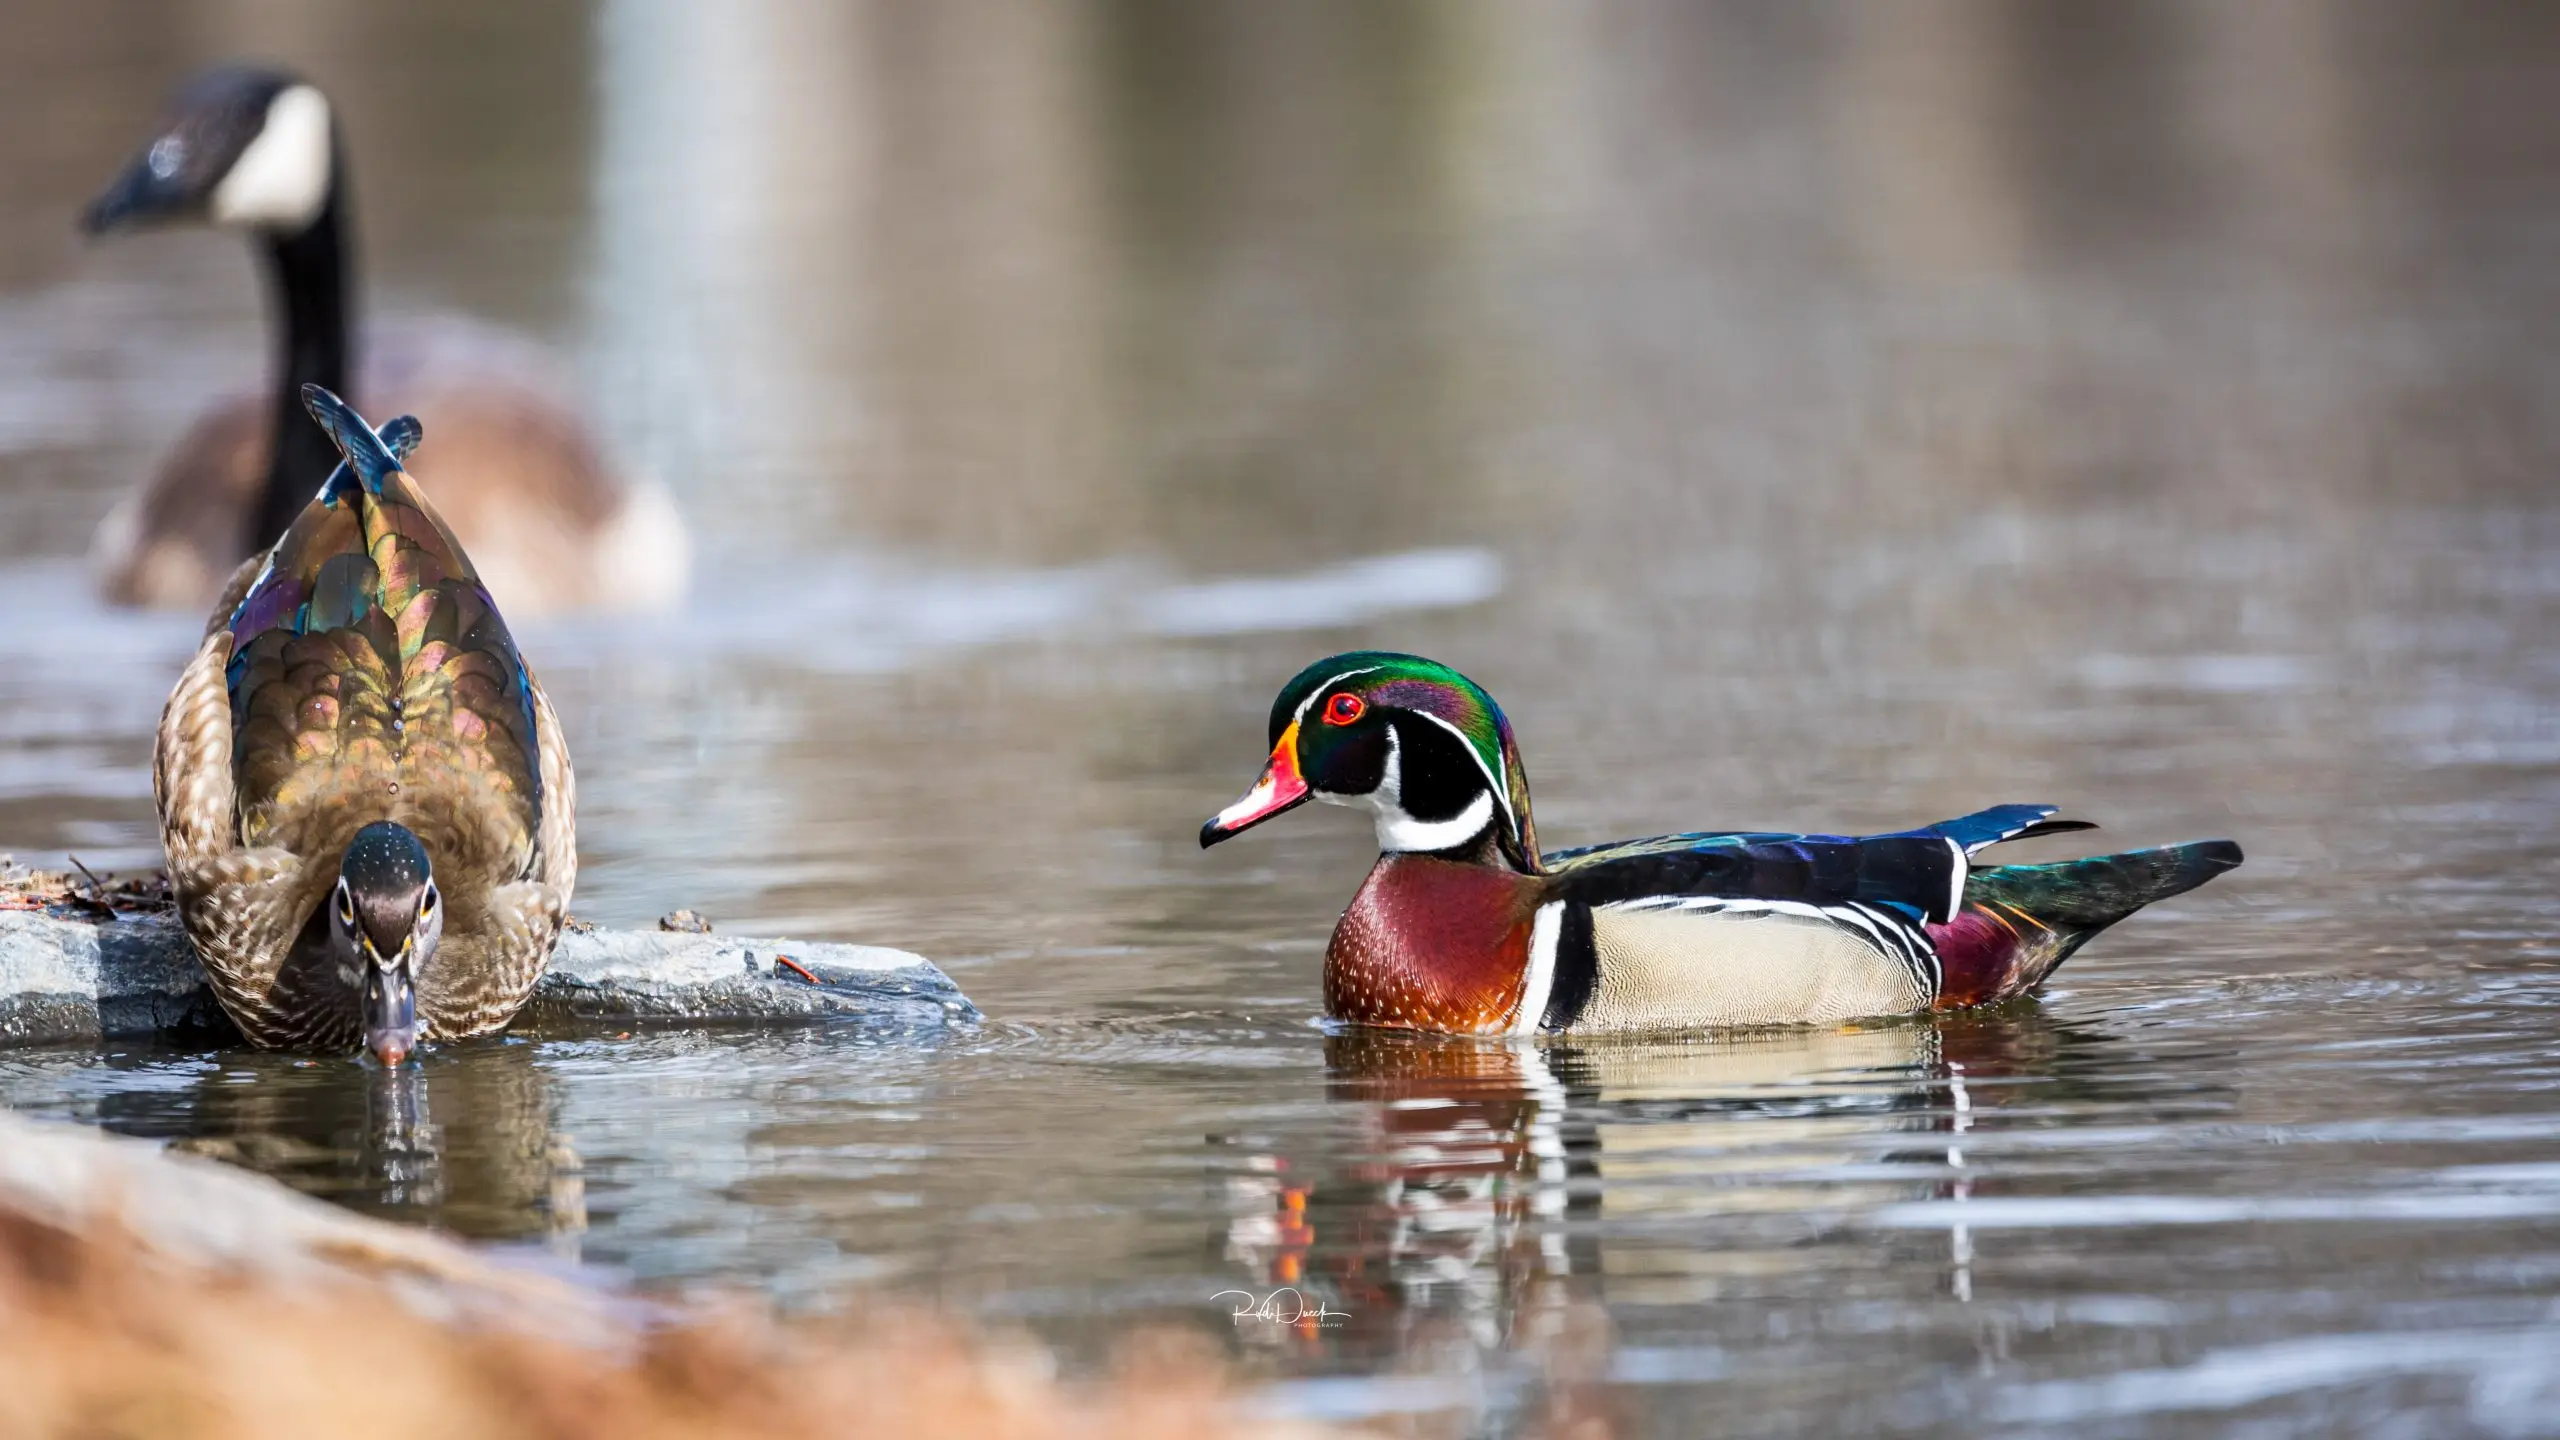 2560x1440 Male and Female Wood Ducks The Nomad Outdoor Adventure Photographer Rudi Dueck | Landscape | Bir | Nature | Insects | Wildlife | Photography